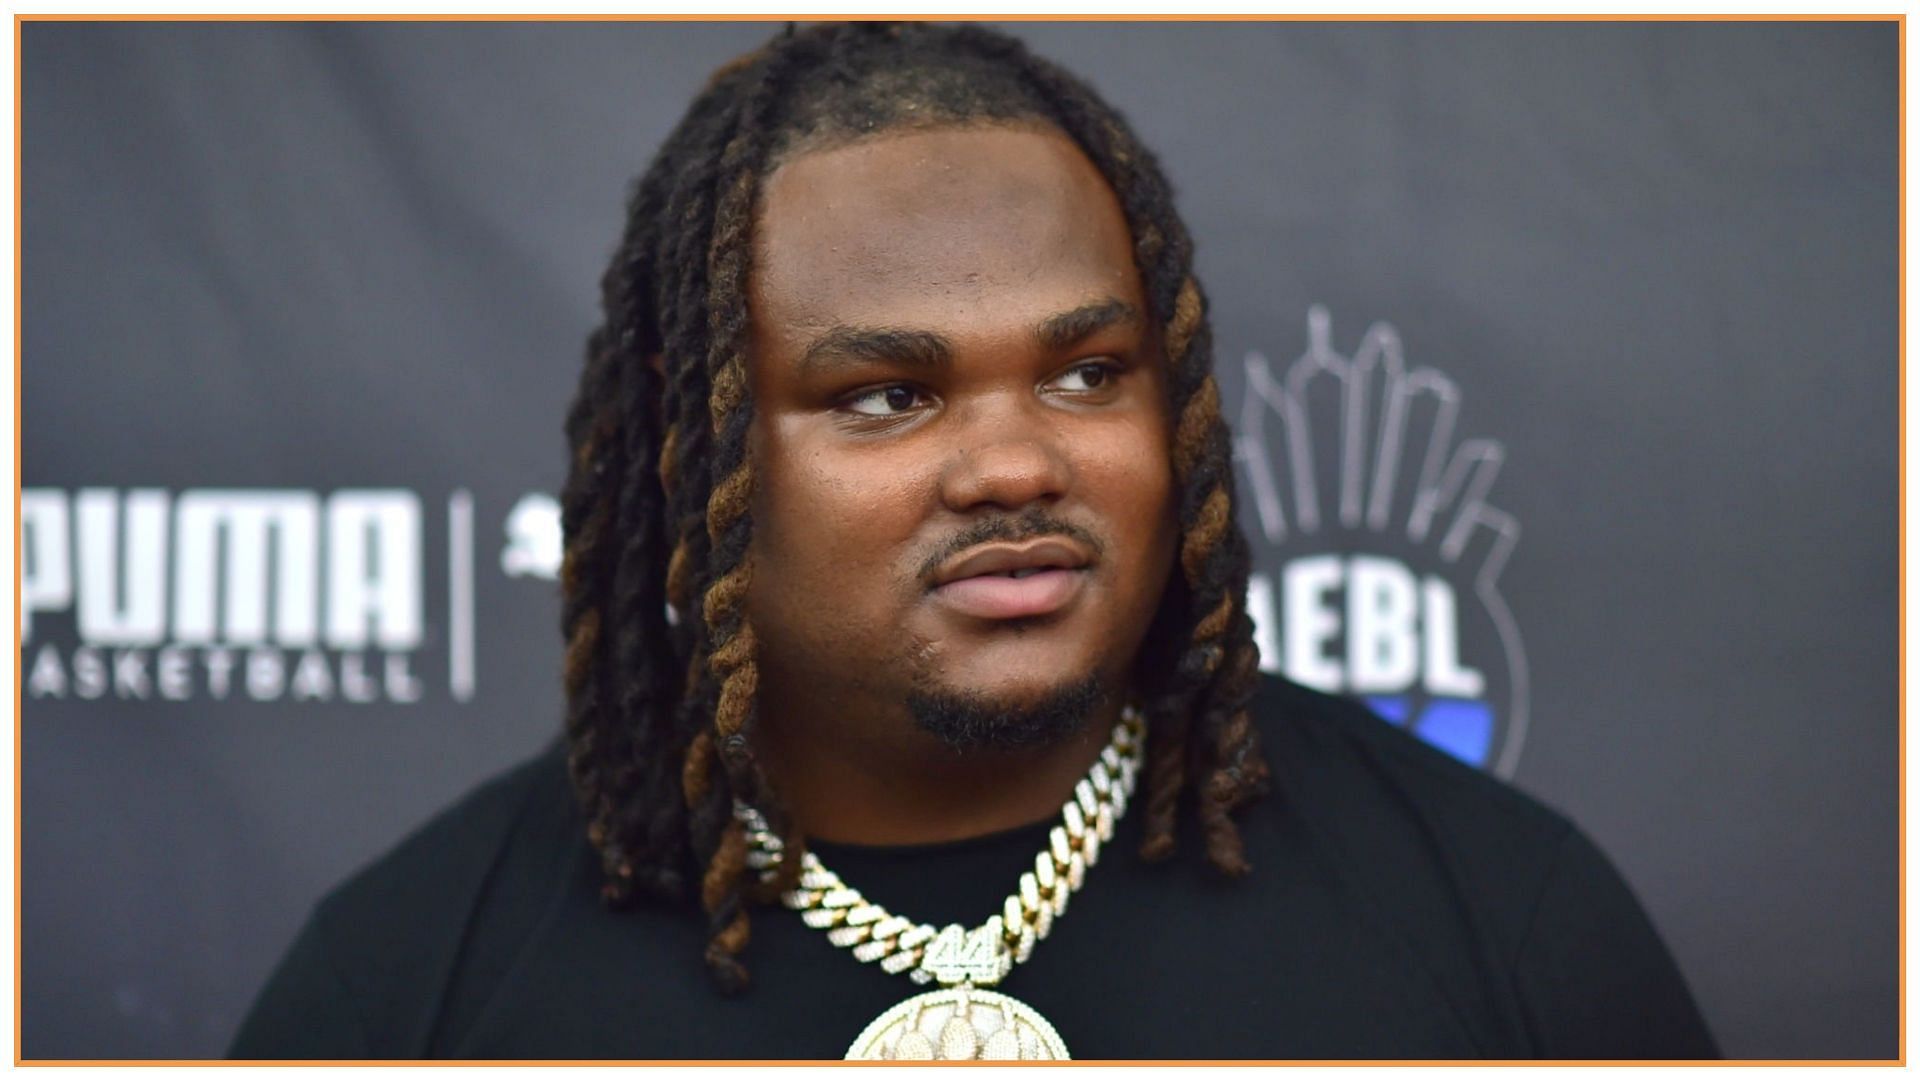 Tee Grizzley was a victim of robbery where he was robbed of $1 million (Image via Prince Williams/Getty Images)